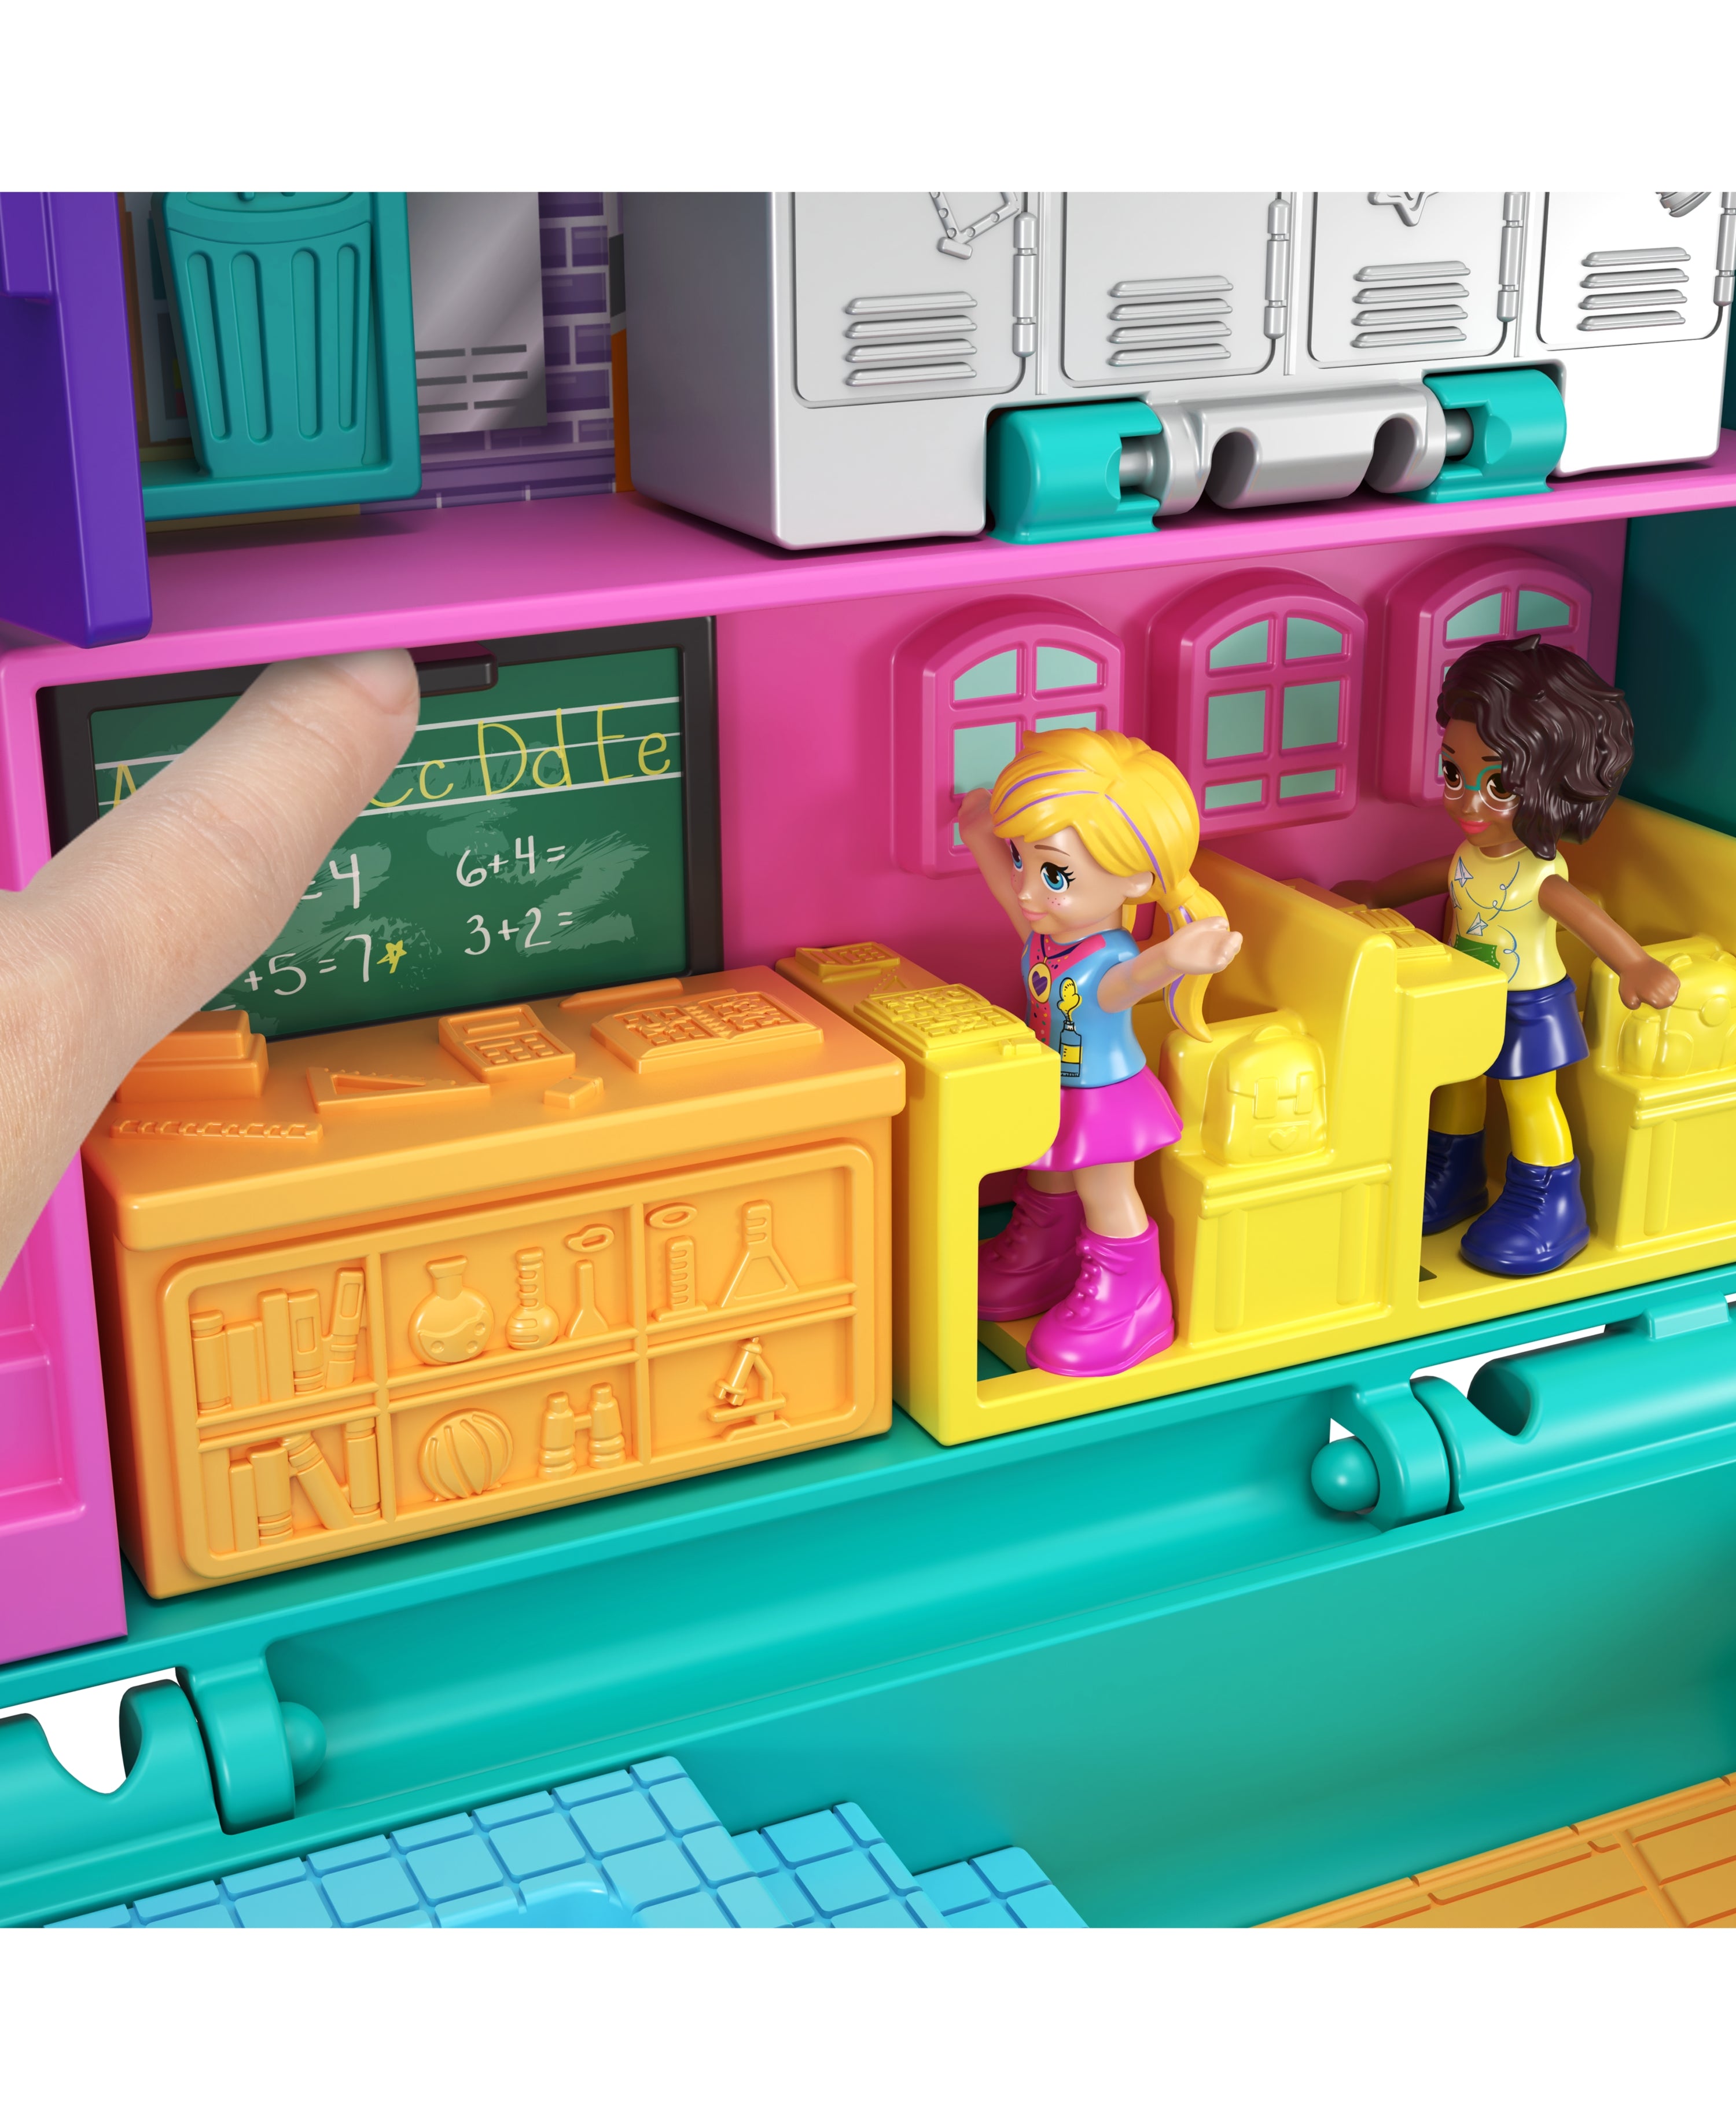 Polly Pocket Mini Middle School Compact with Dolls And Accessories